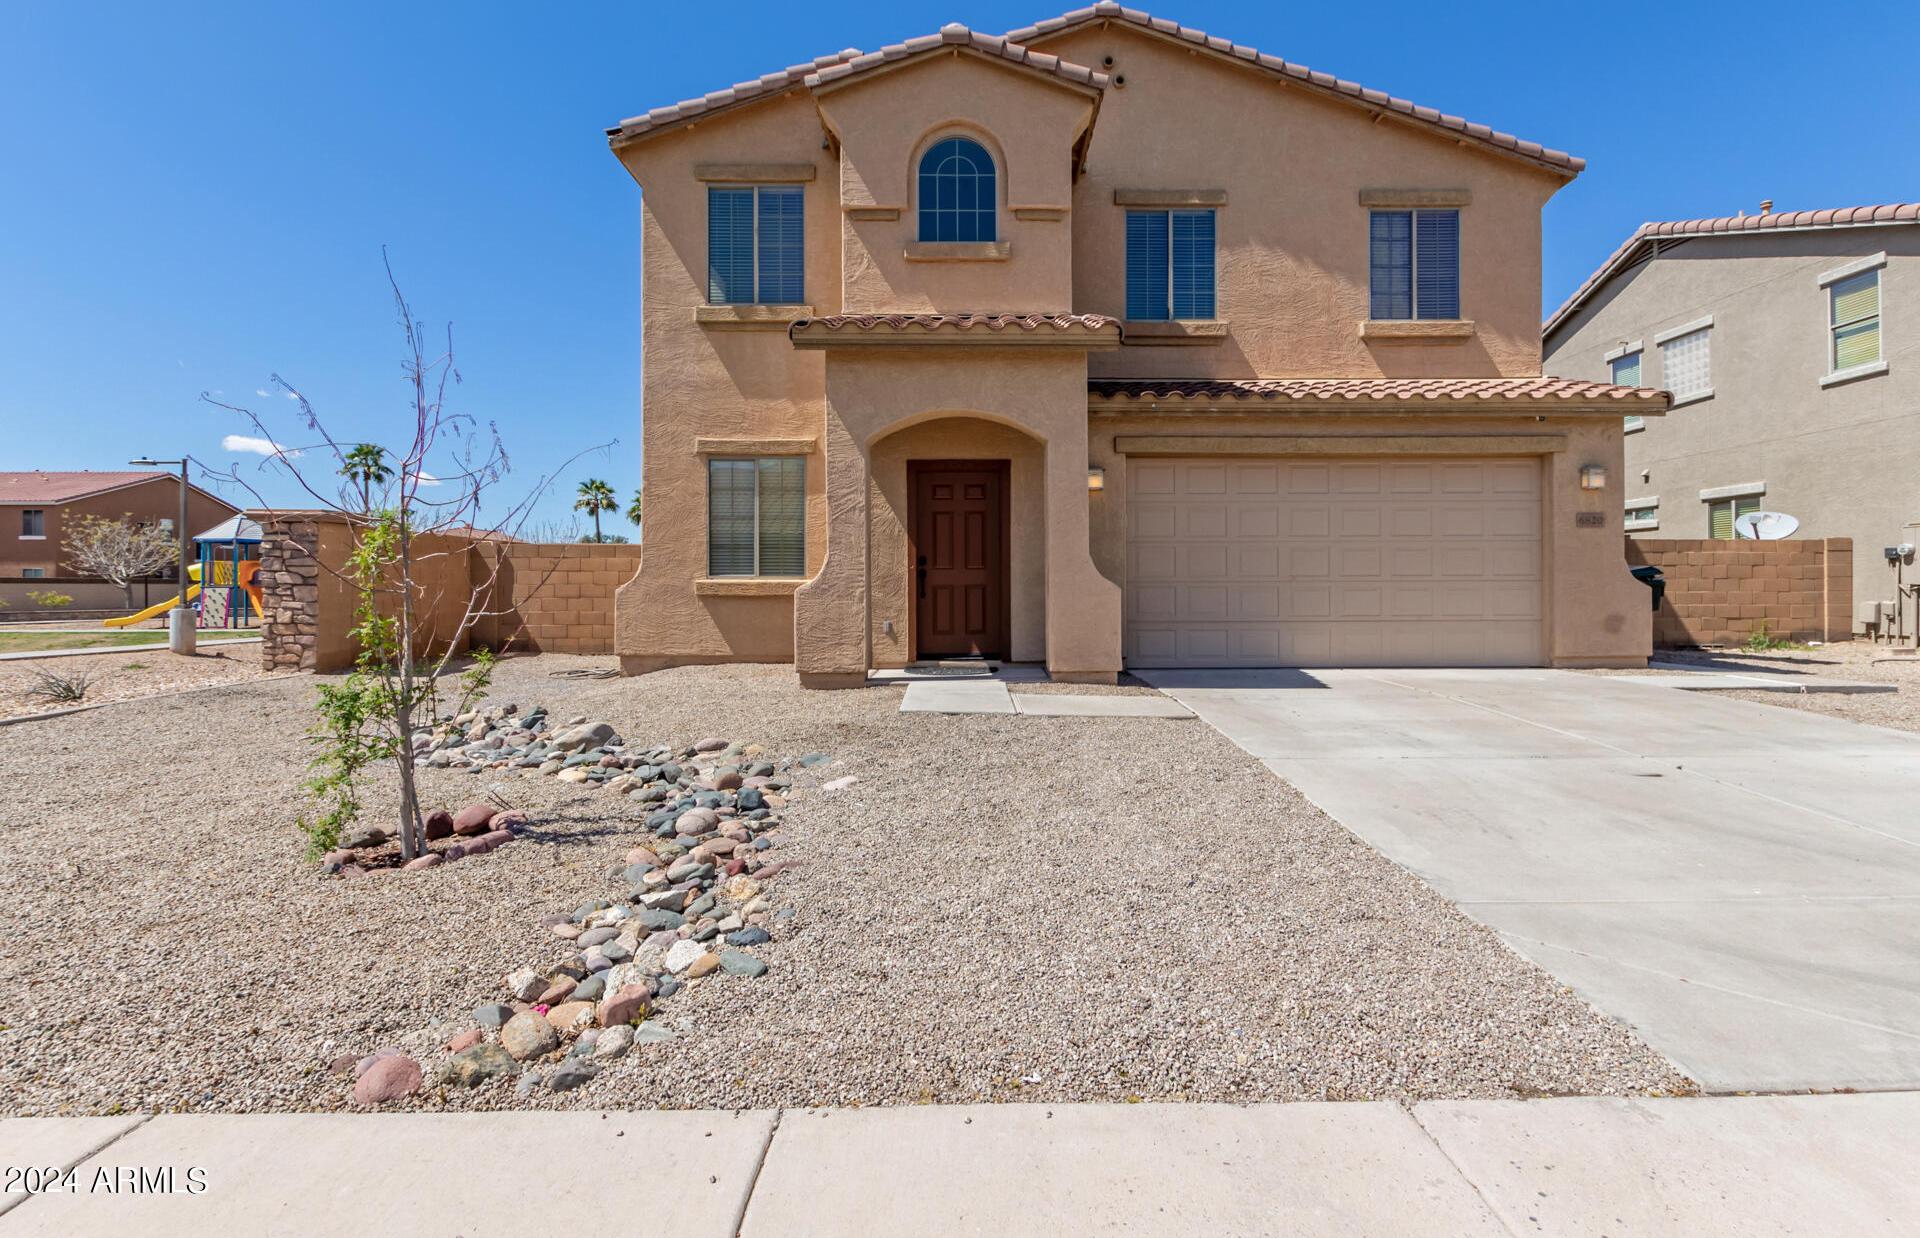 Photo one of 6820 S 68Th Dr Laveen AZ 85339 | MLS 6682962